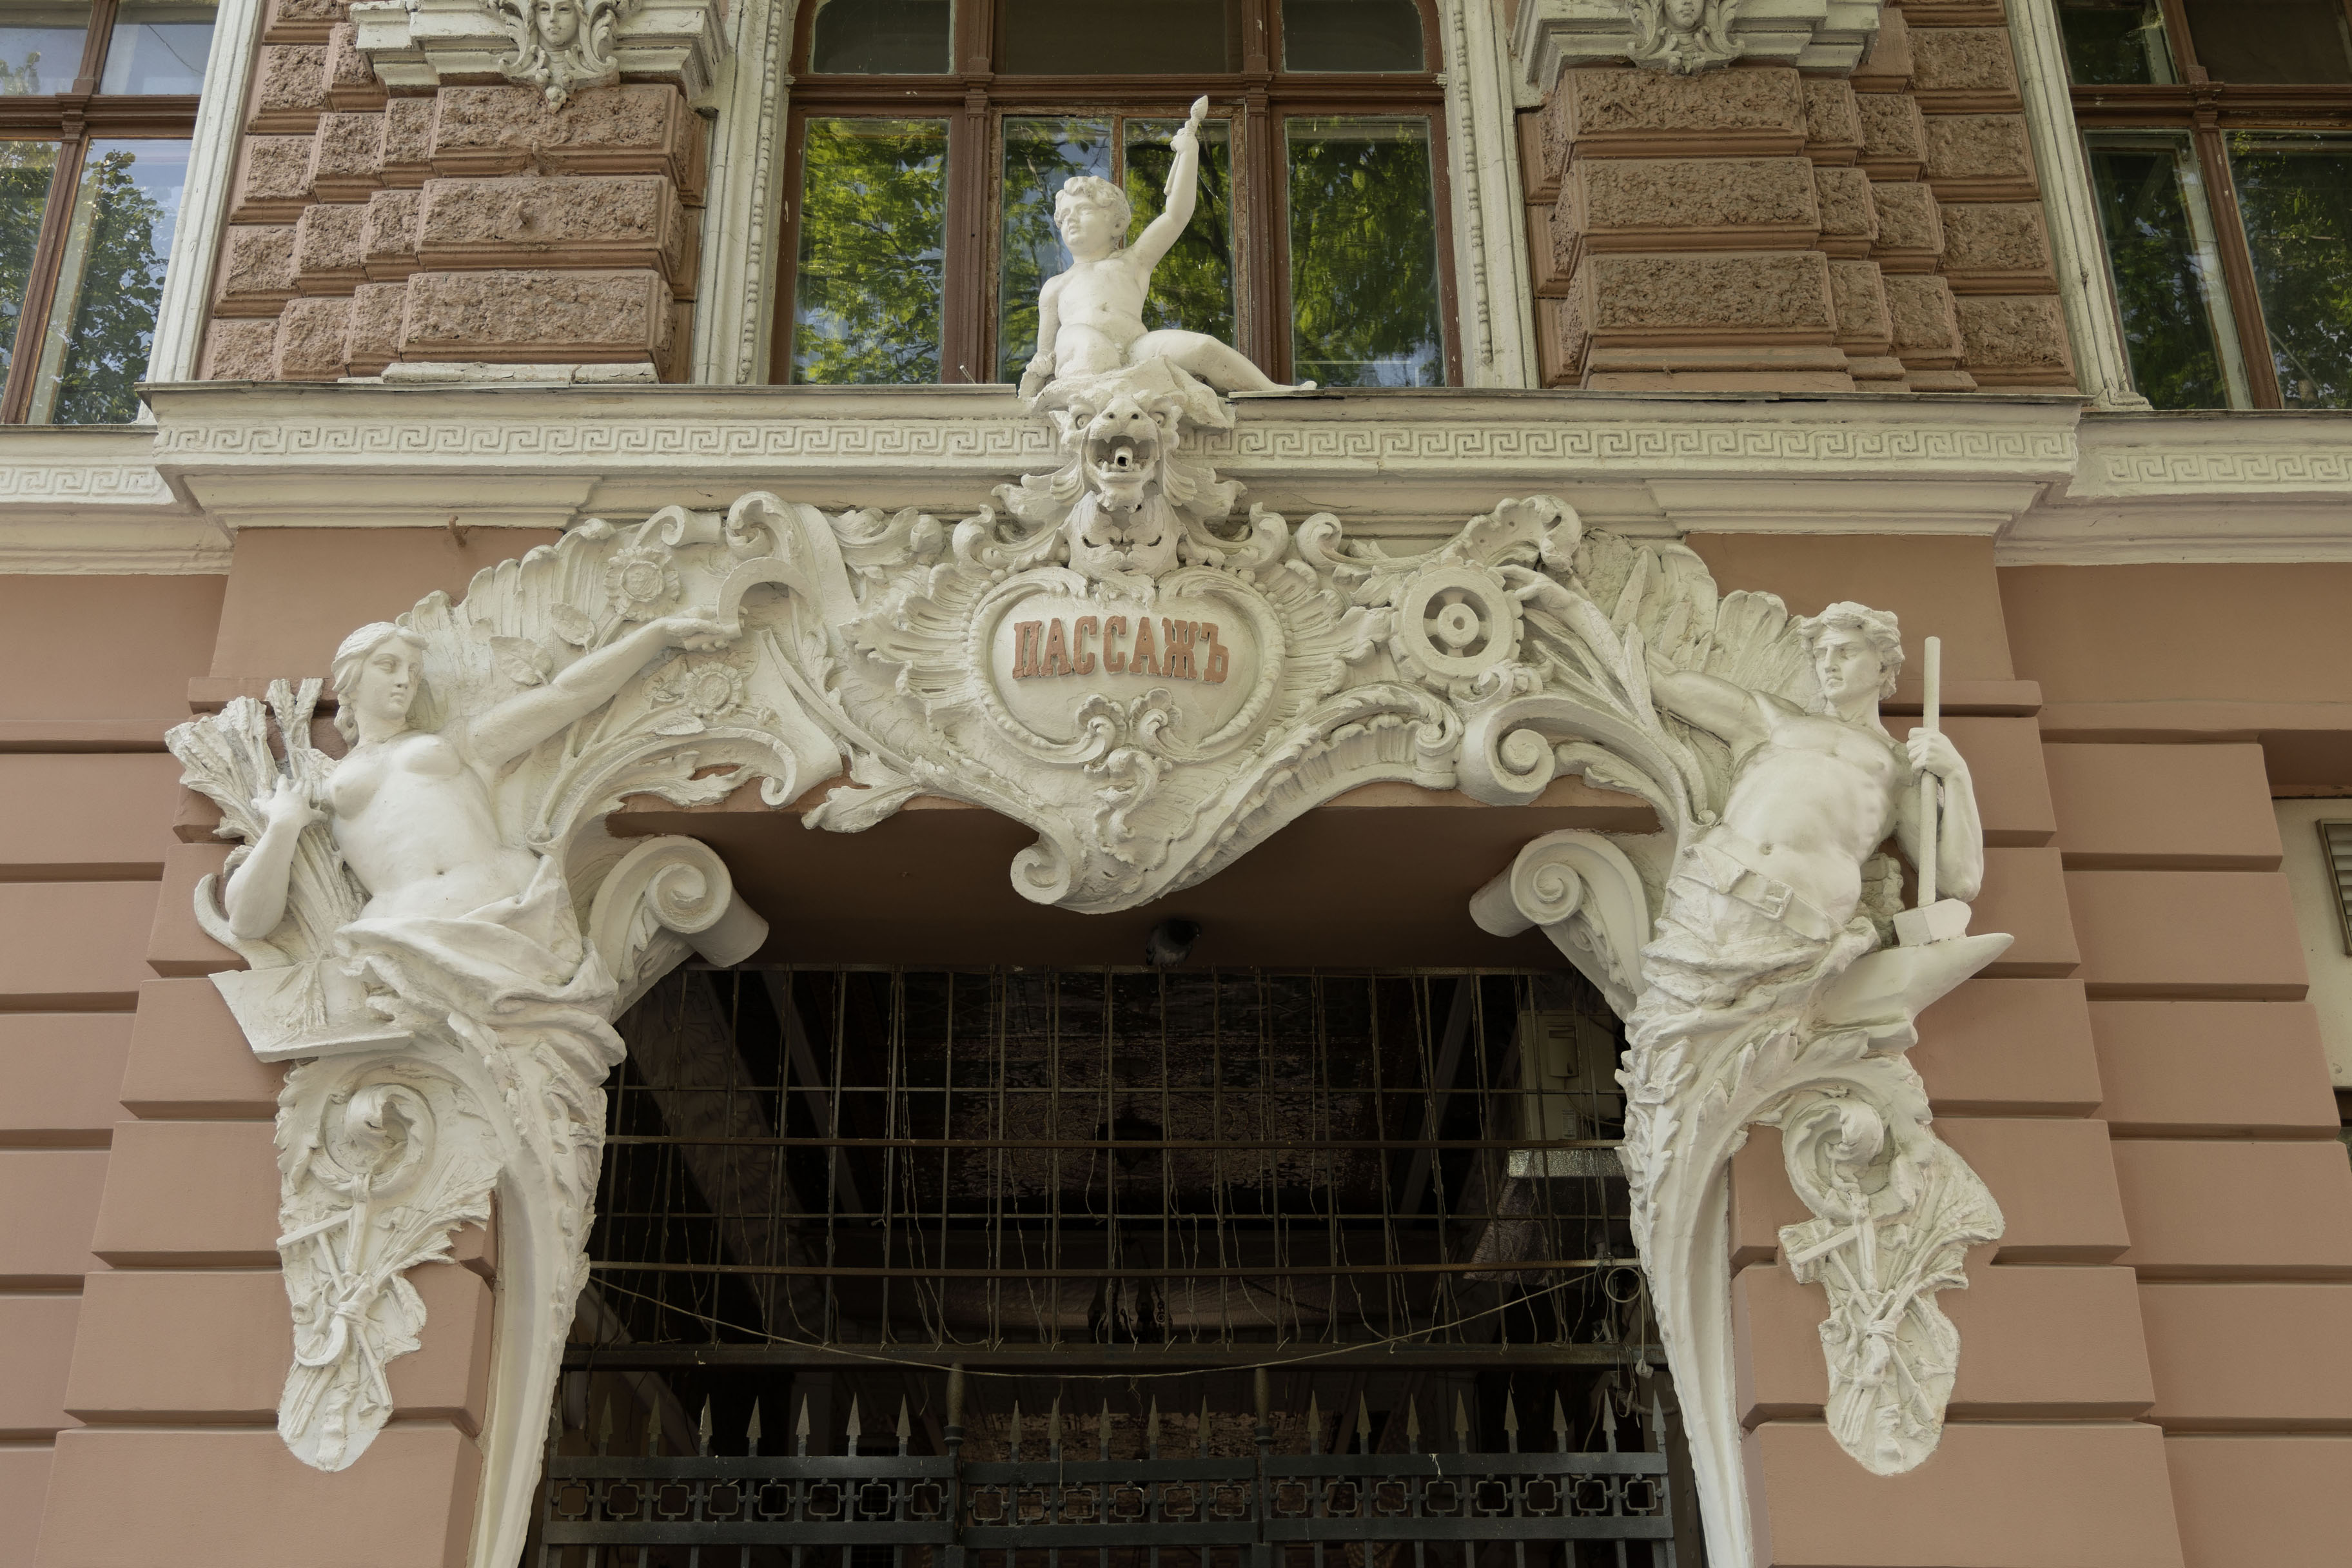 The lavishly sculpted entrance of the Passage in Odesa | Impresiones de Odesa | Ucrania